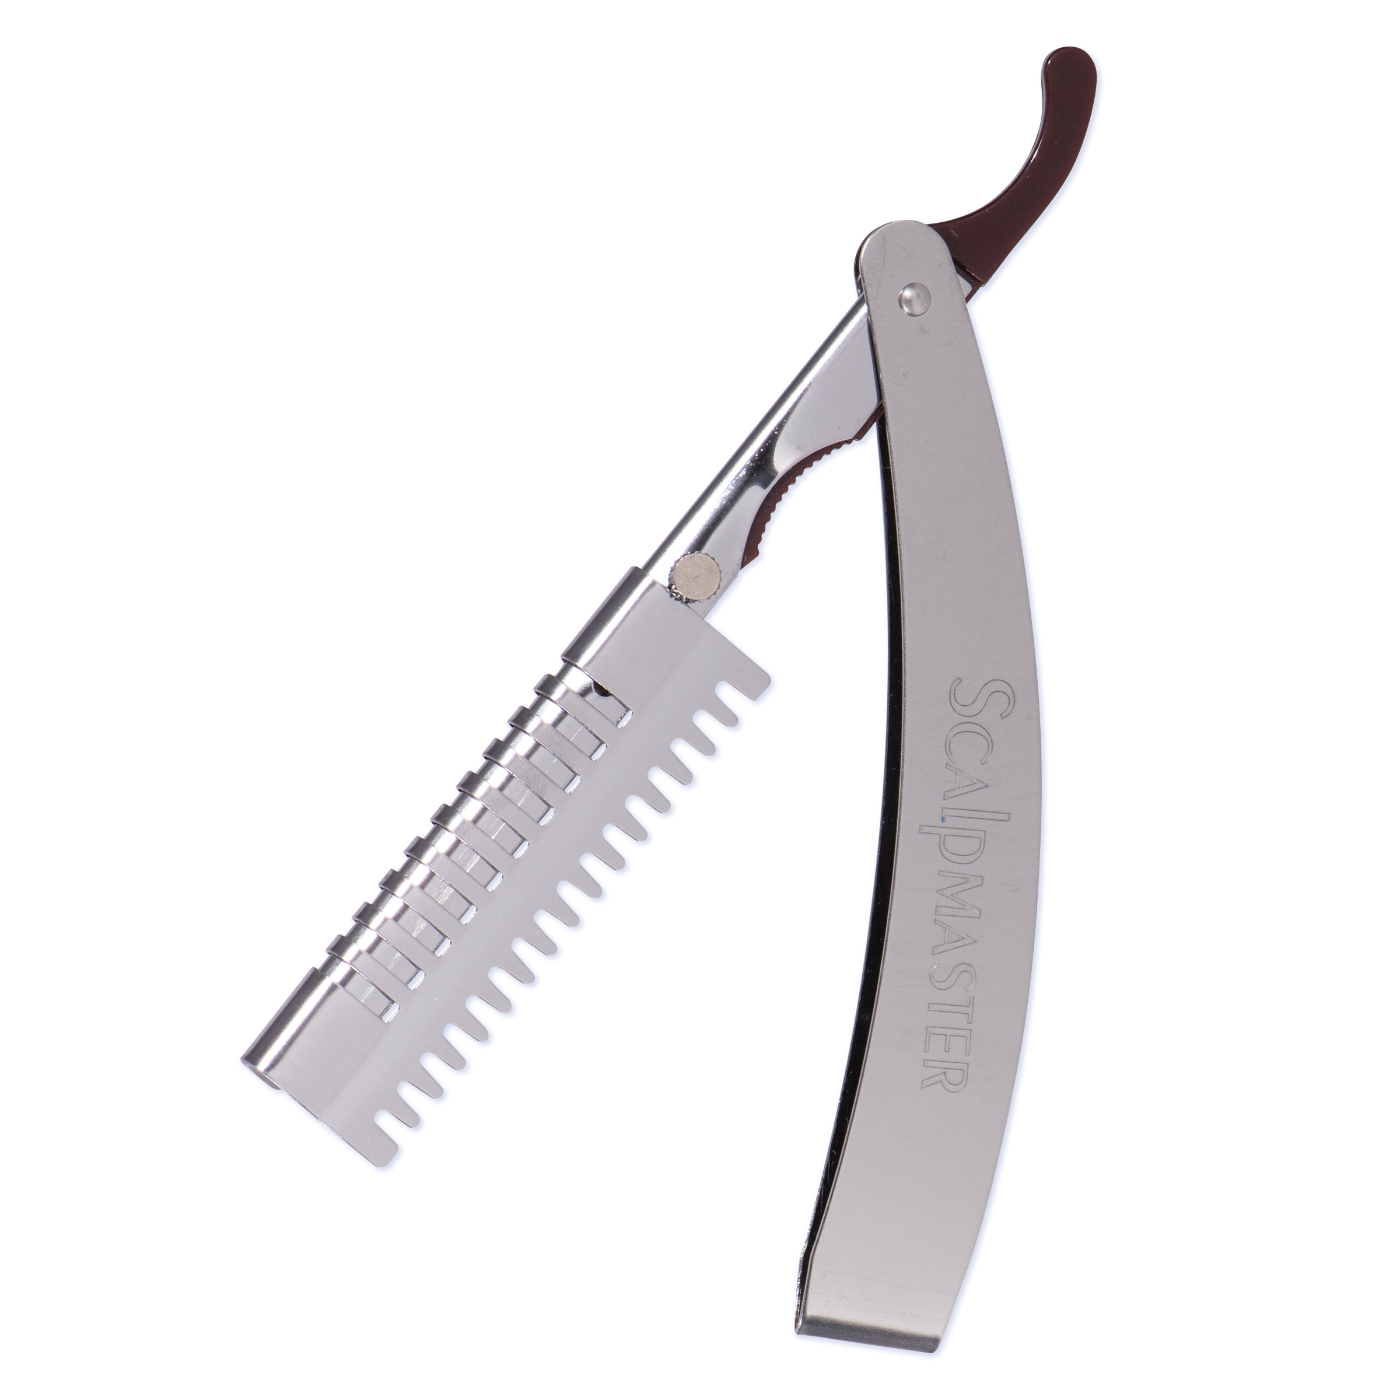 Stainless Steel Hair Shaper in a Case with 5 Blades